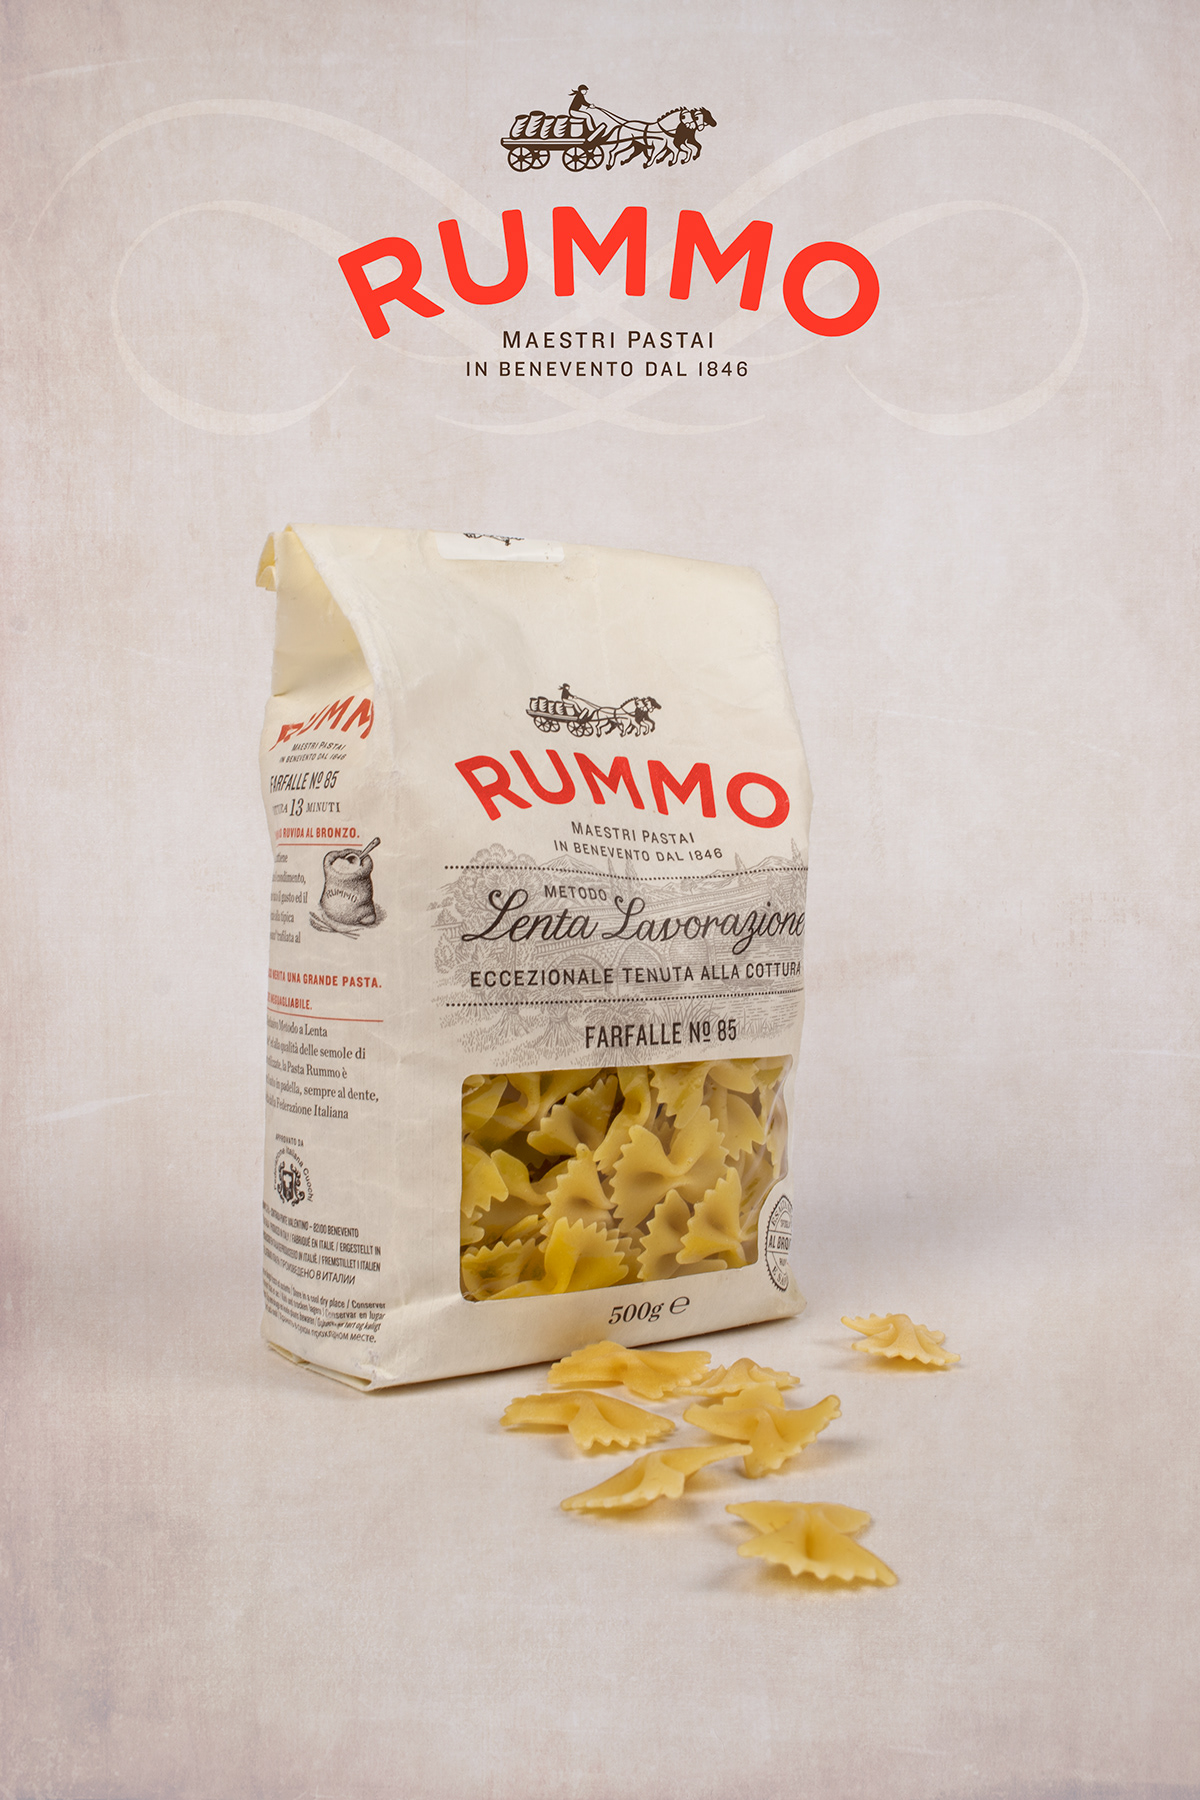 Design Graphic Photography  art direction  rummo Pasta vintage rustic